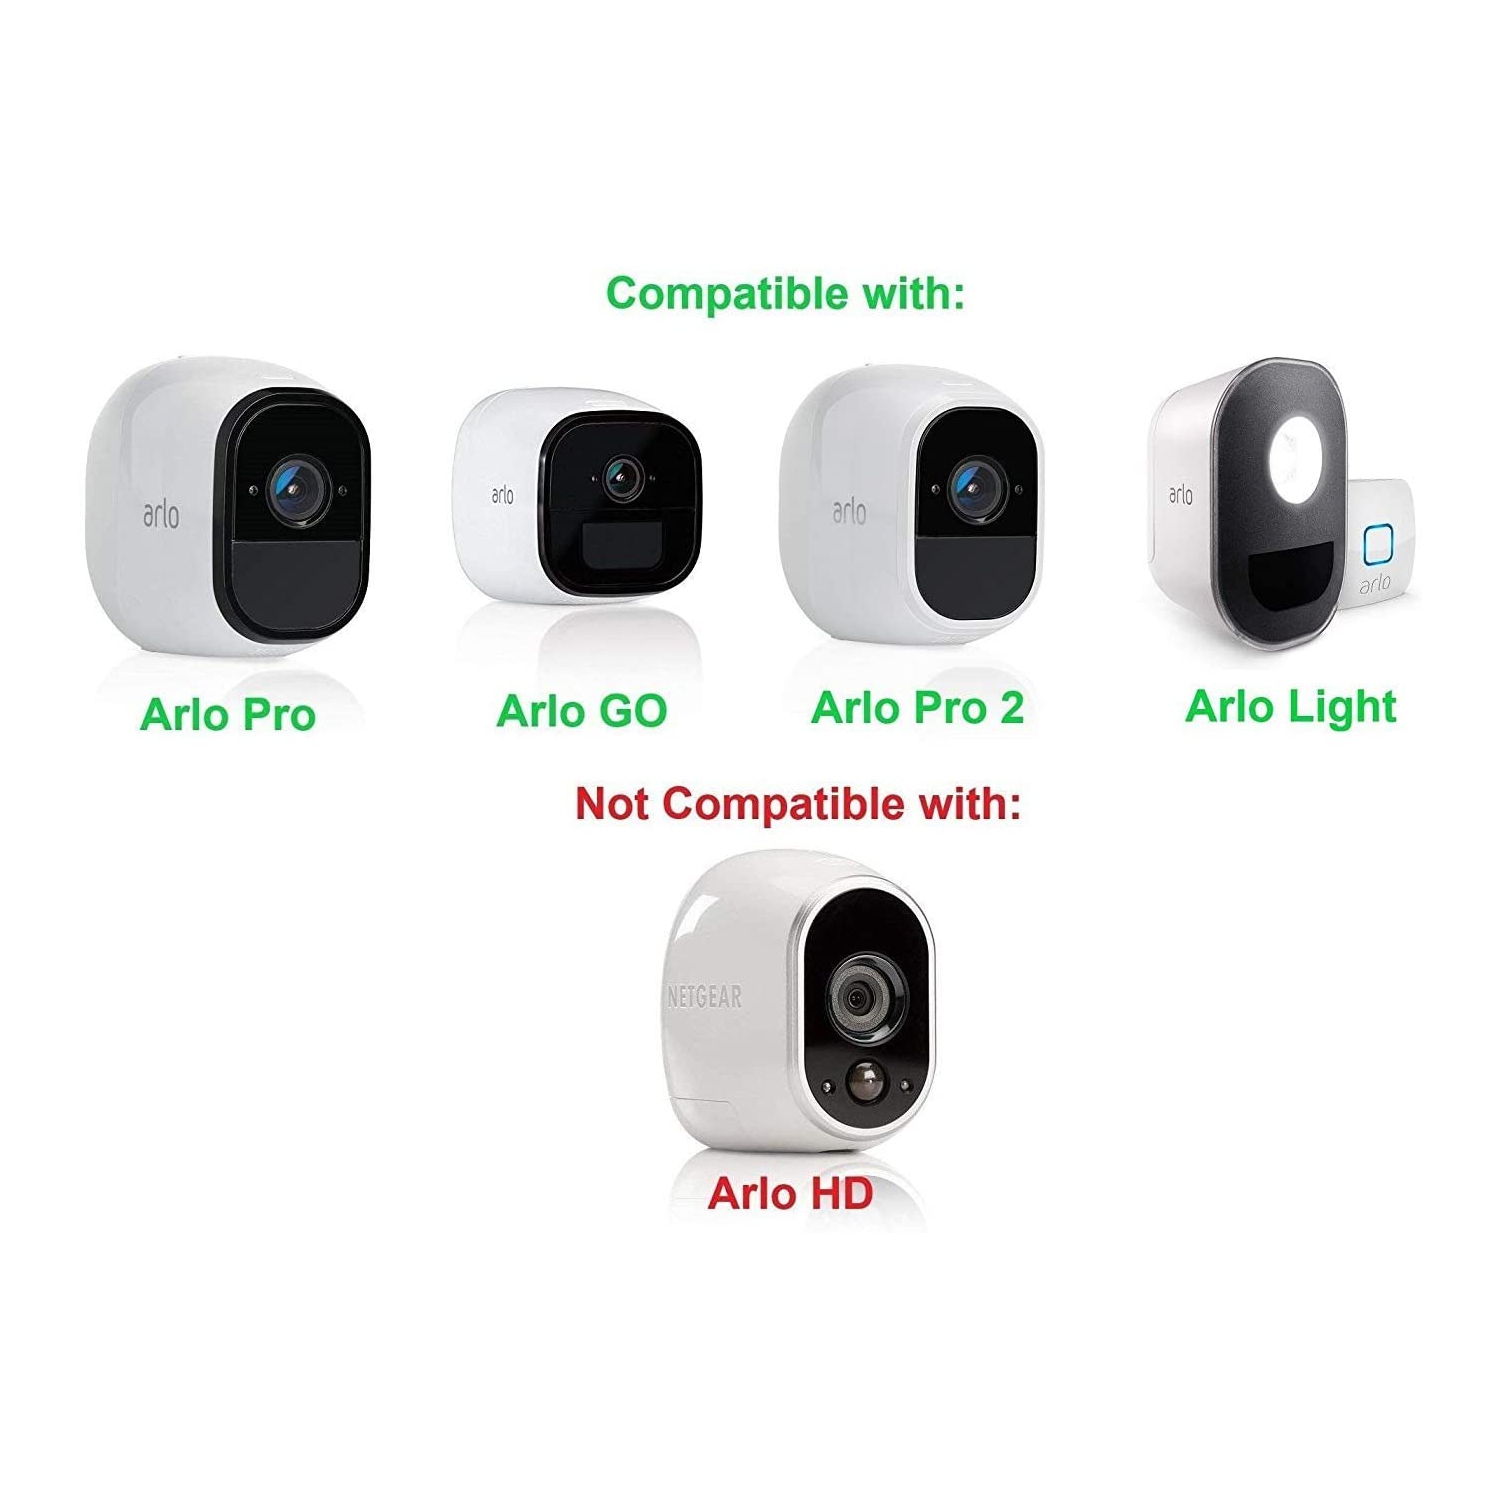 Power Your Arlo HD Outdoor Camera Continuously Arlo HD Wired Adapter Black by Wasserstein 